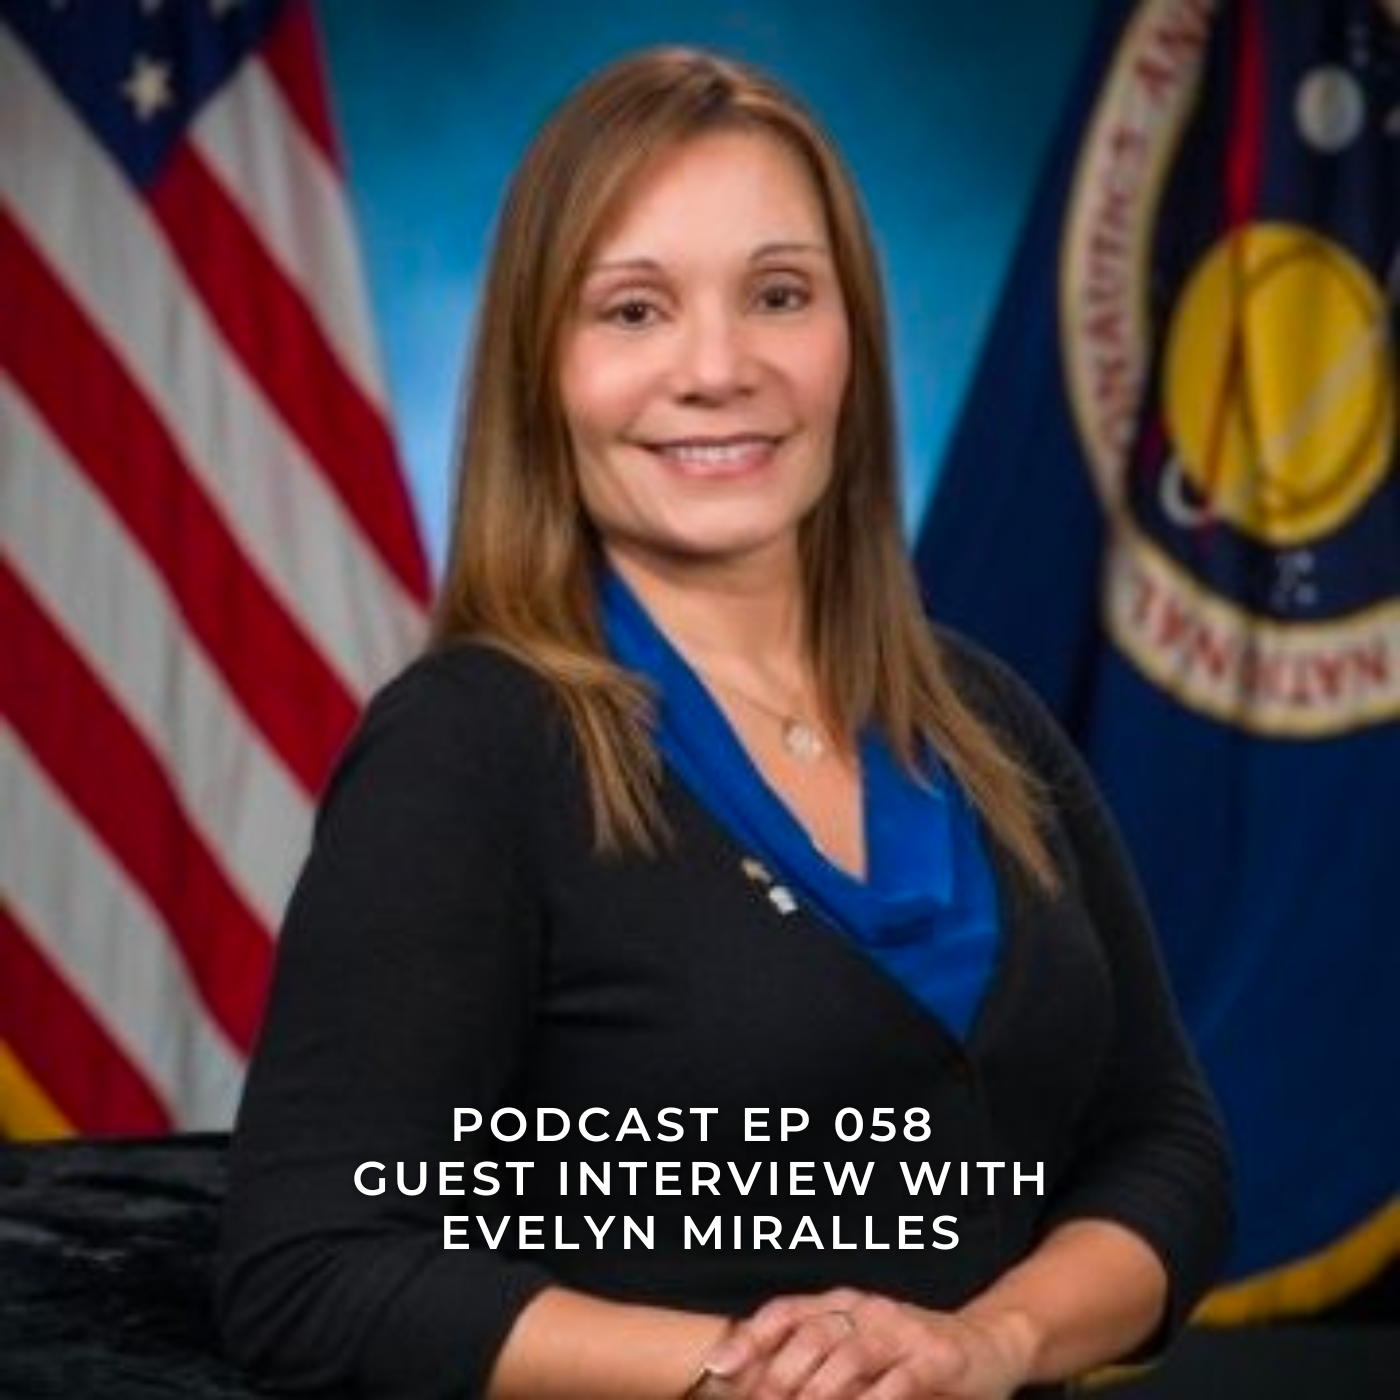 Guest Interview with Evelyn Miralles